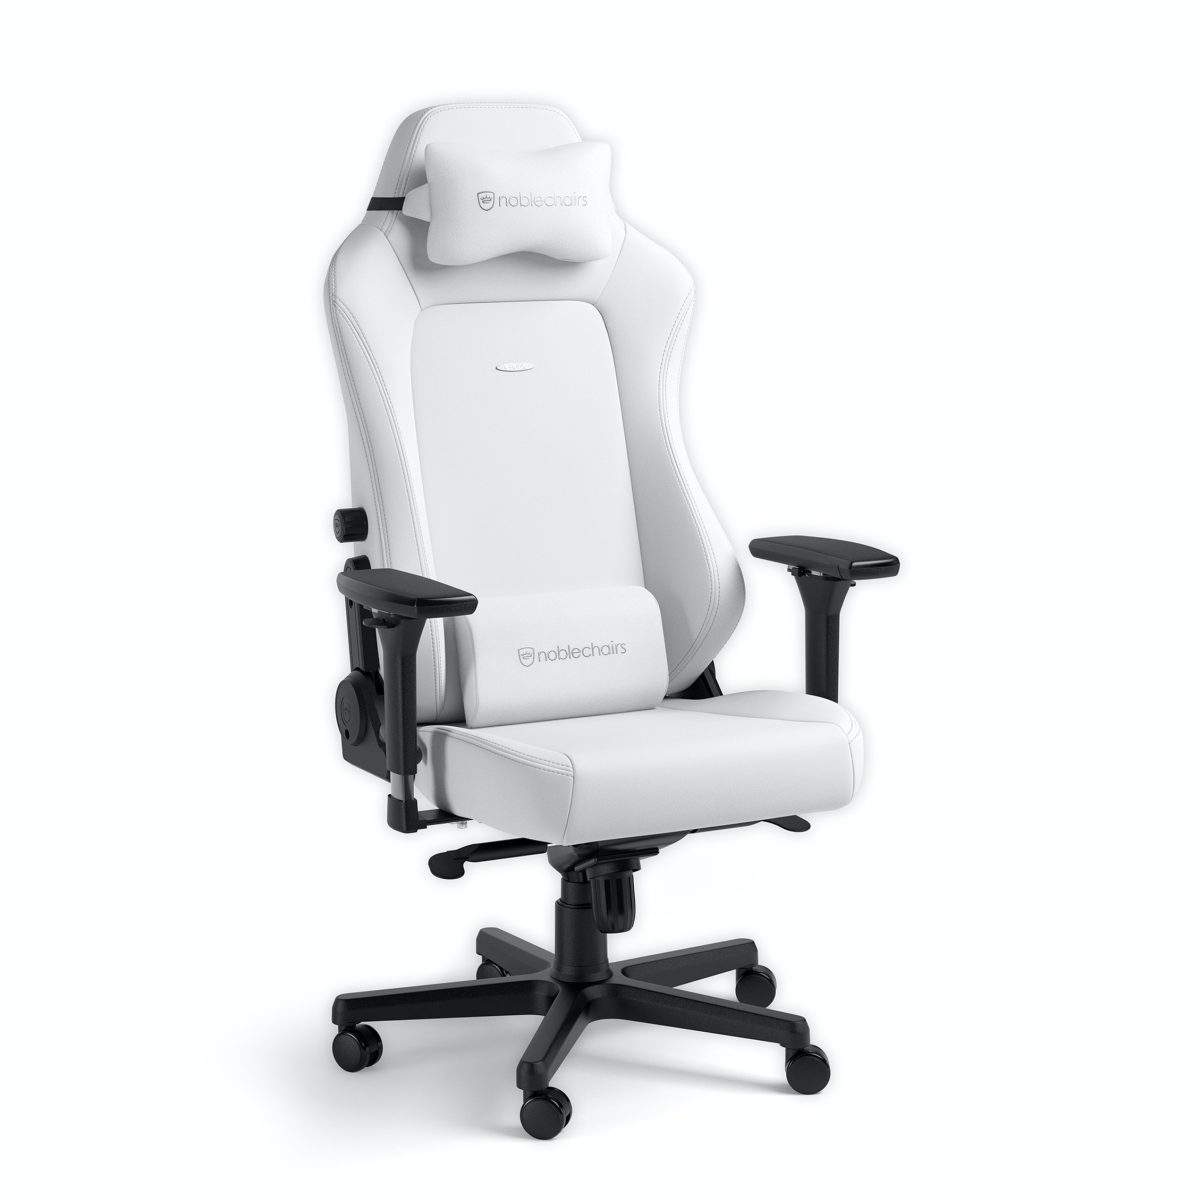 noblechairs HERO Gaming Chair - high-tech German Faux Leather, 150kg - White Edition - CASEKING 2.35.63.01.009